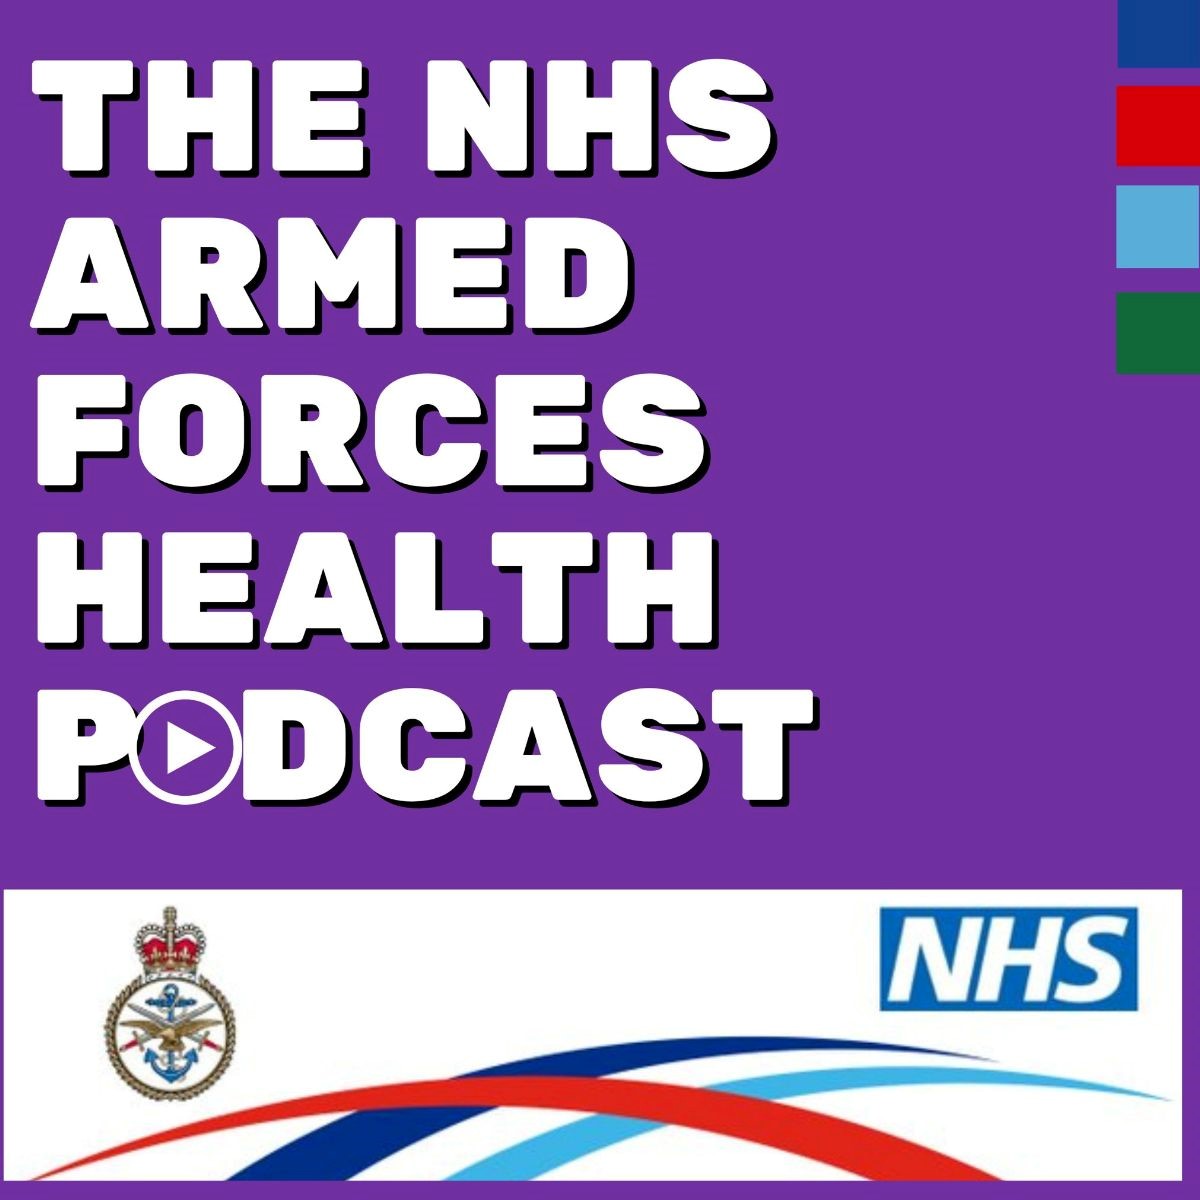 NHS armed forces health podcast